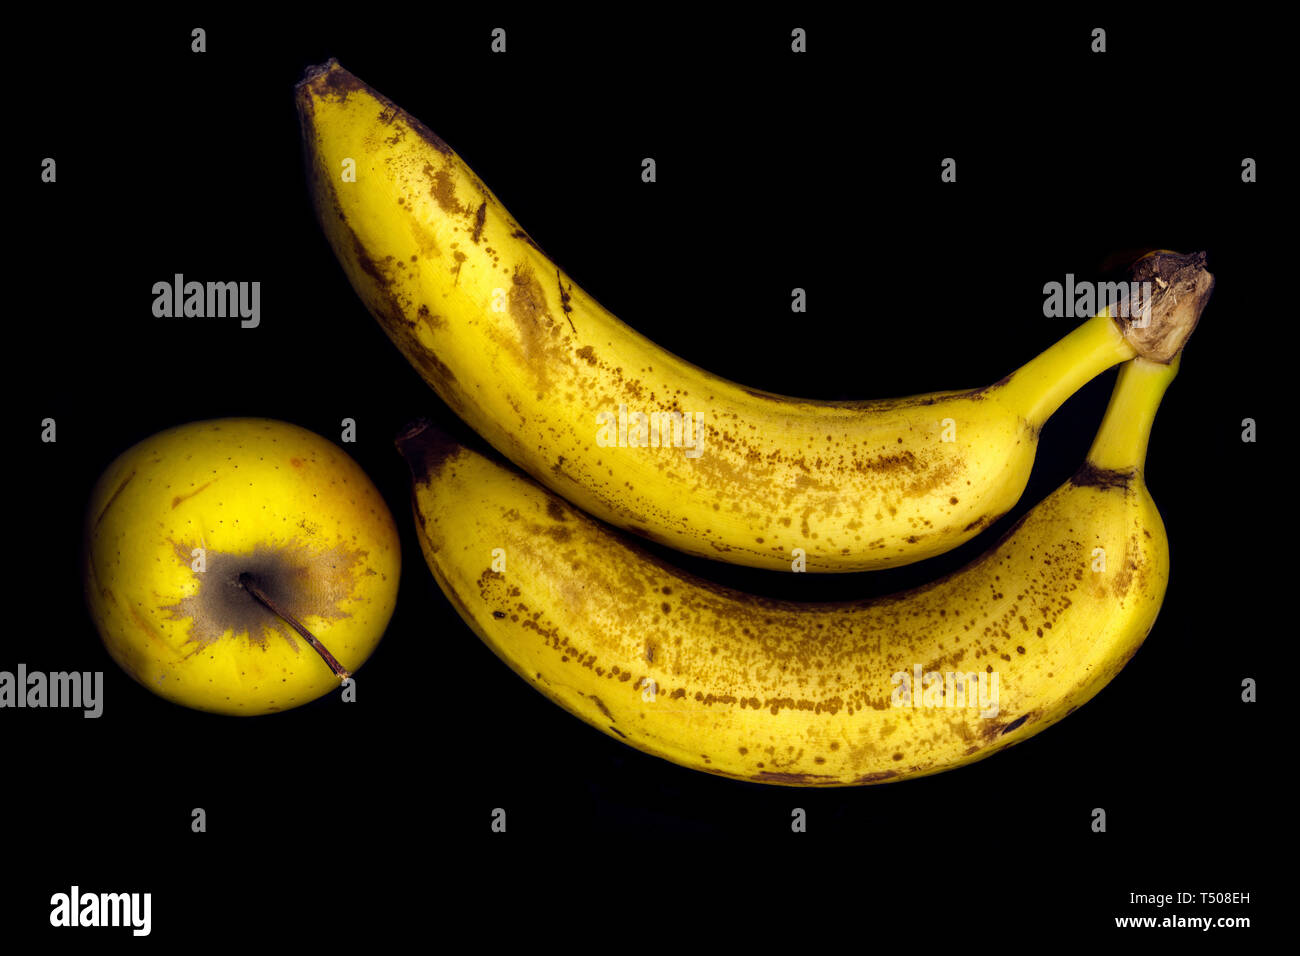 Two ripe banana and apple on a black background Stock Photo